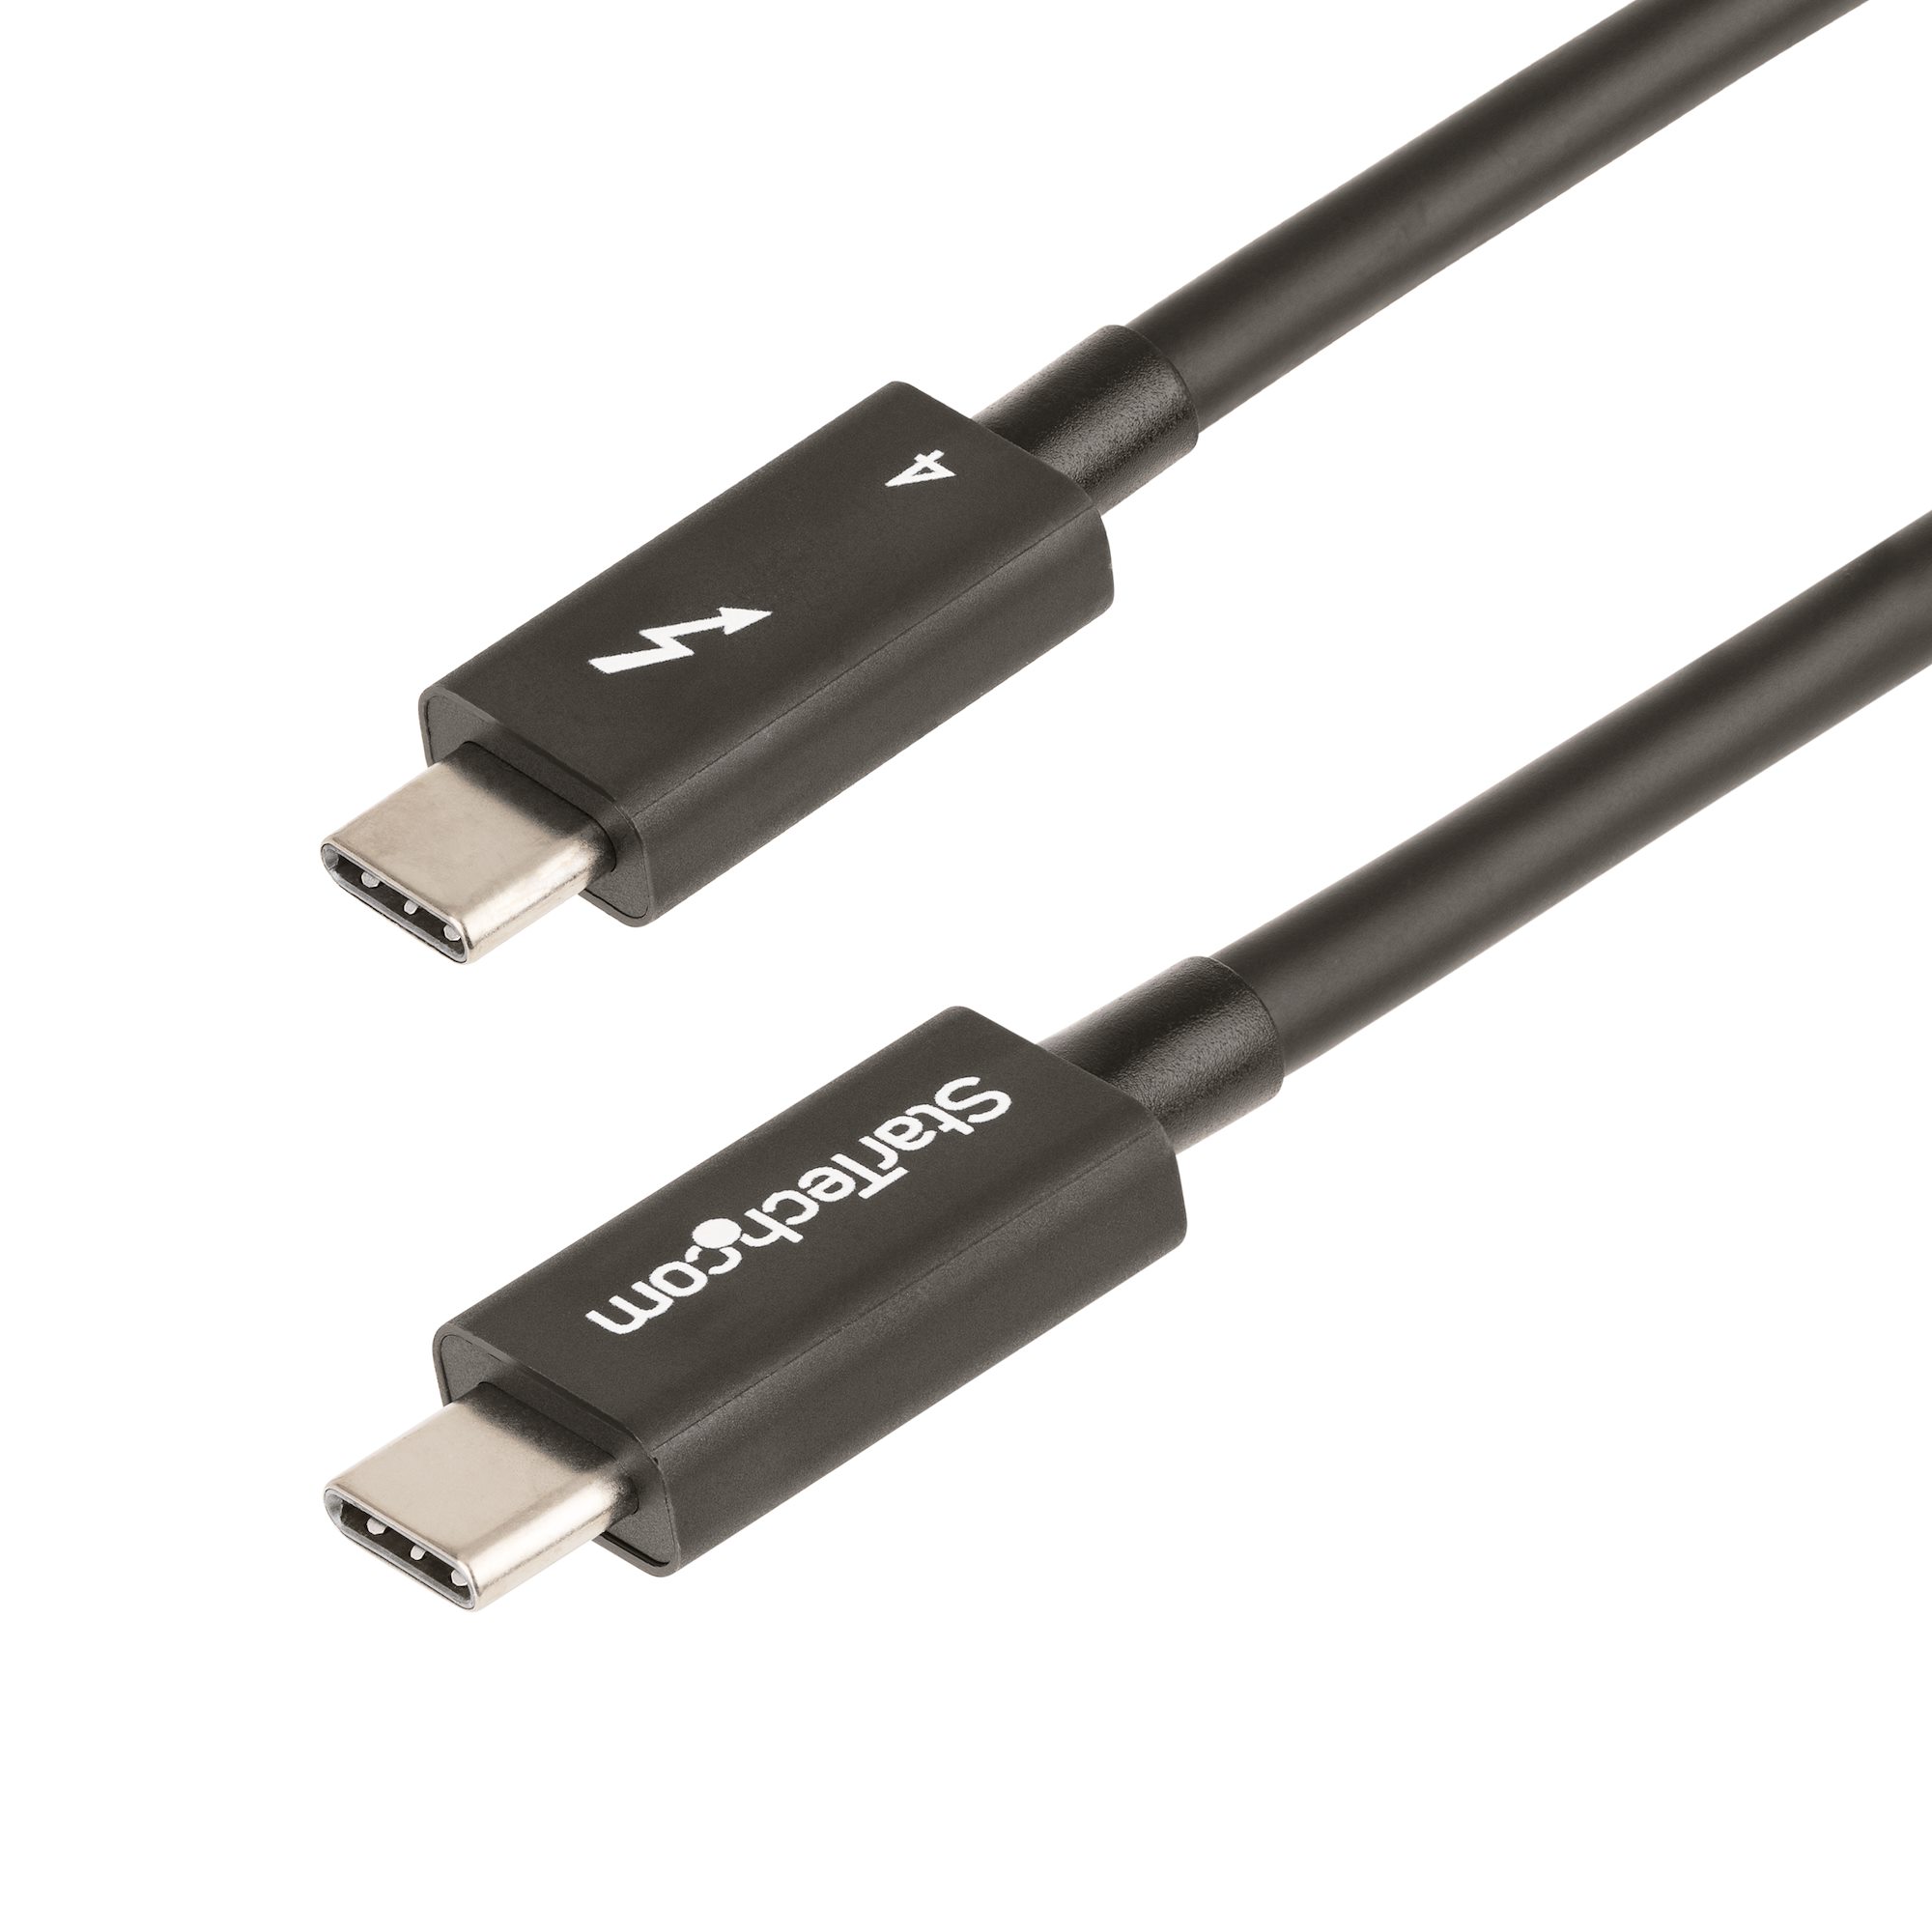 Intel Certified] Thunderbolt 4 USB C Coaxial Cable Bulk - ByteCable